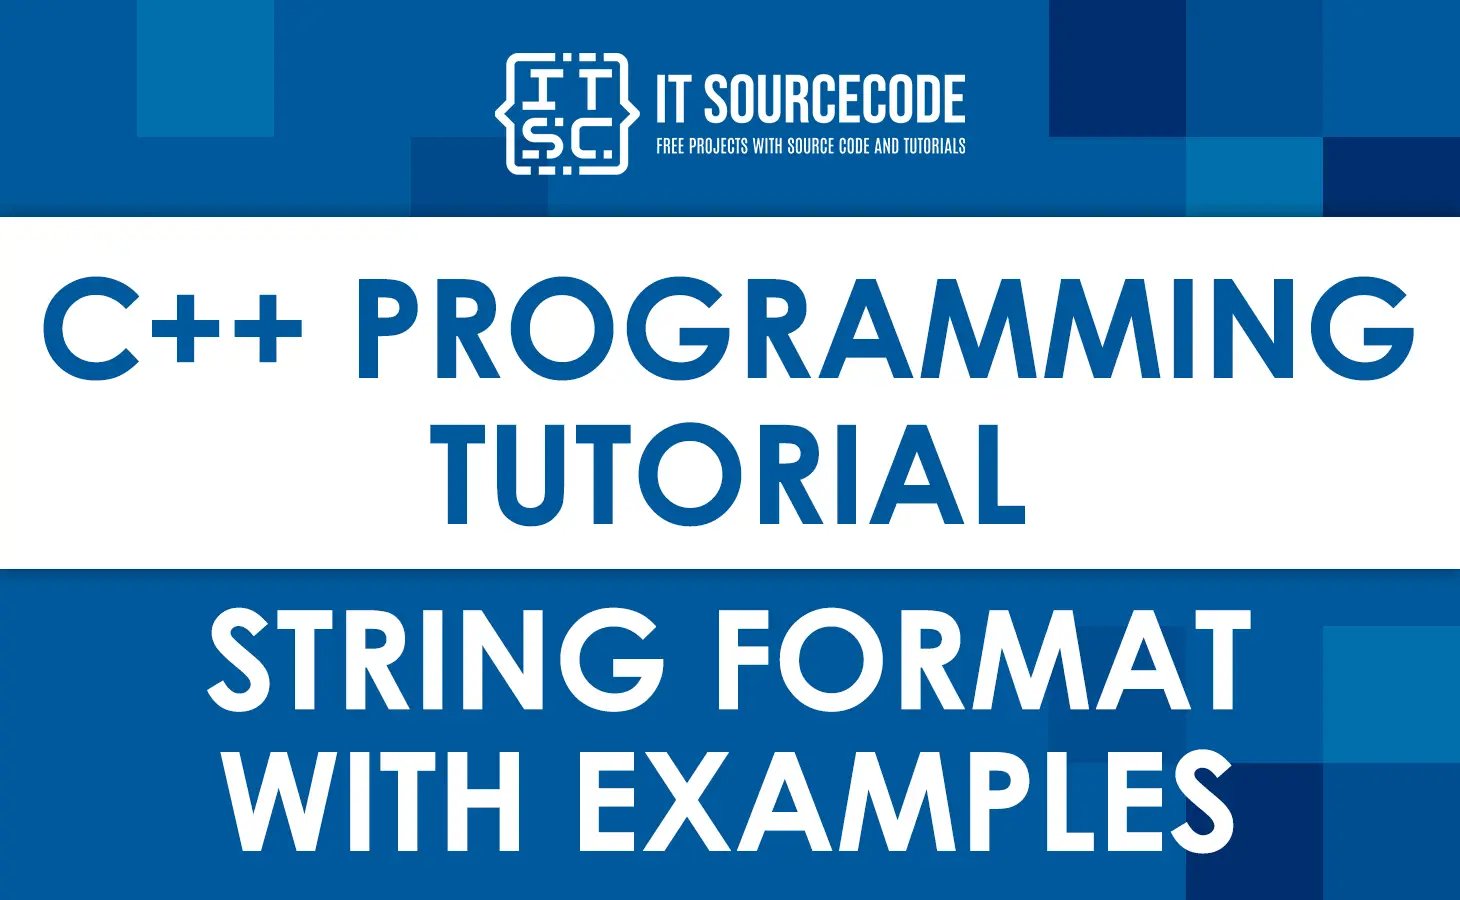 C++ String Format with Examples